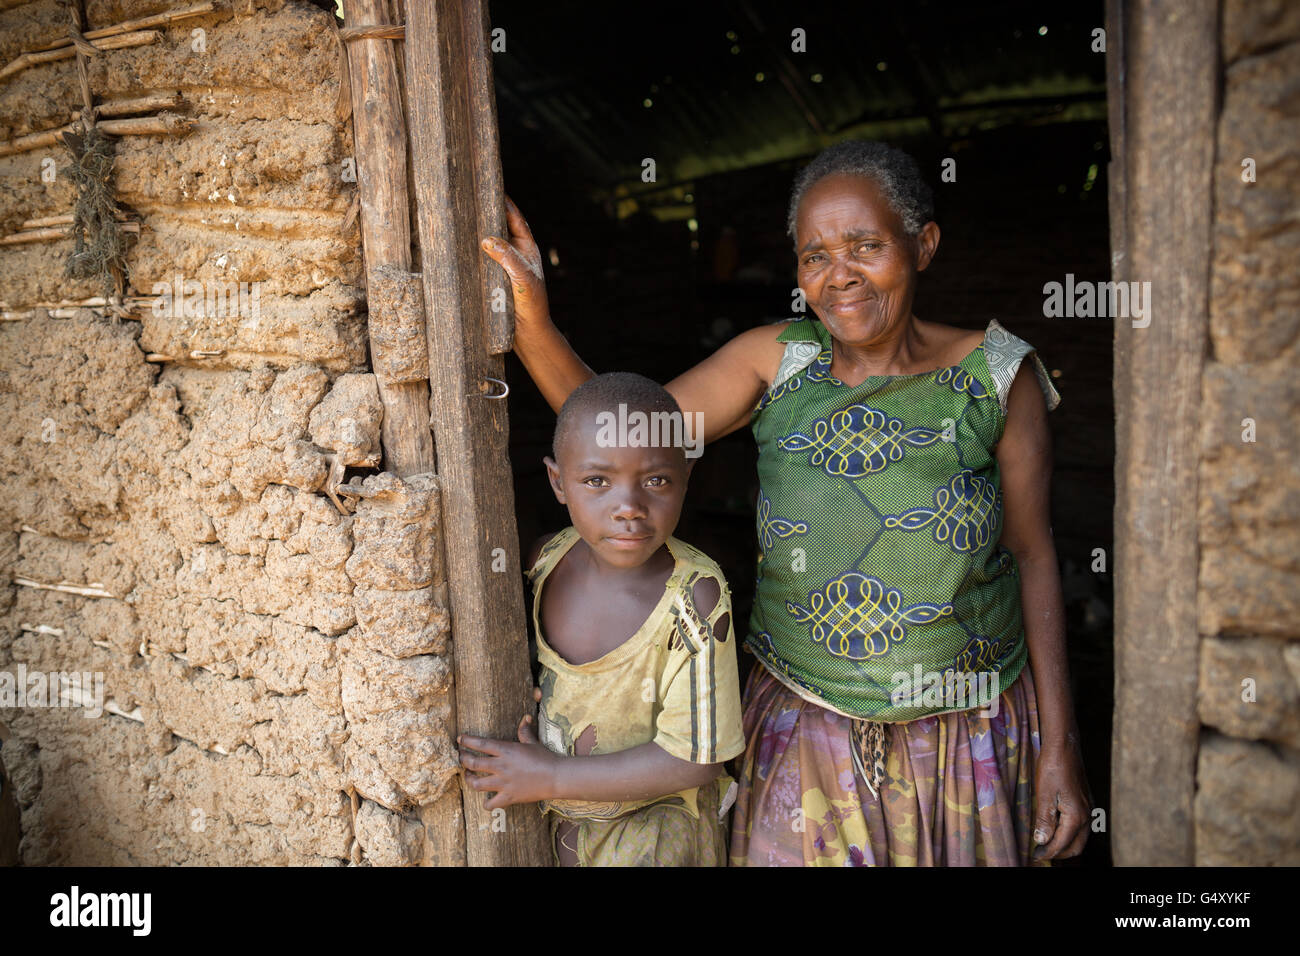 A mother and child stand together in the doorway of their home in rural Kasese District, Uganda. Stock Photo